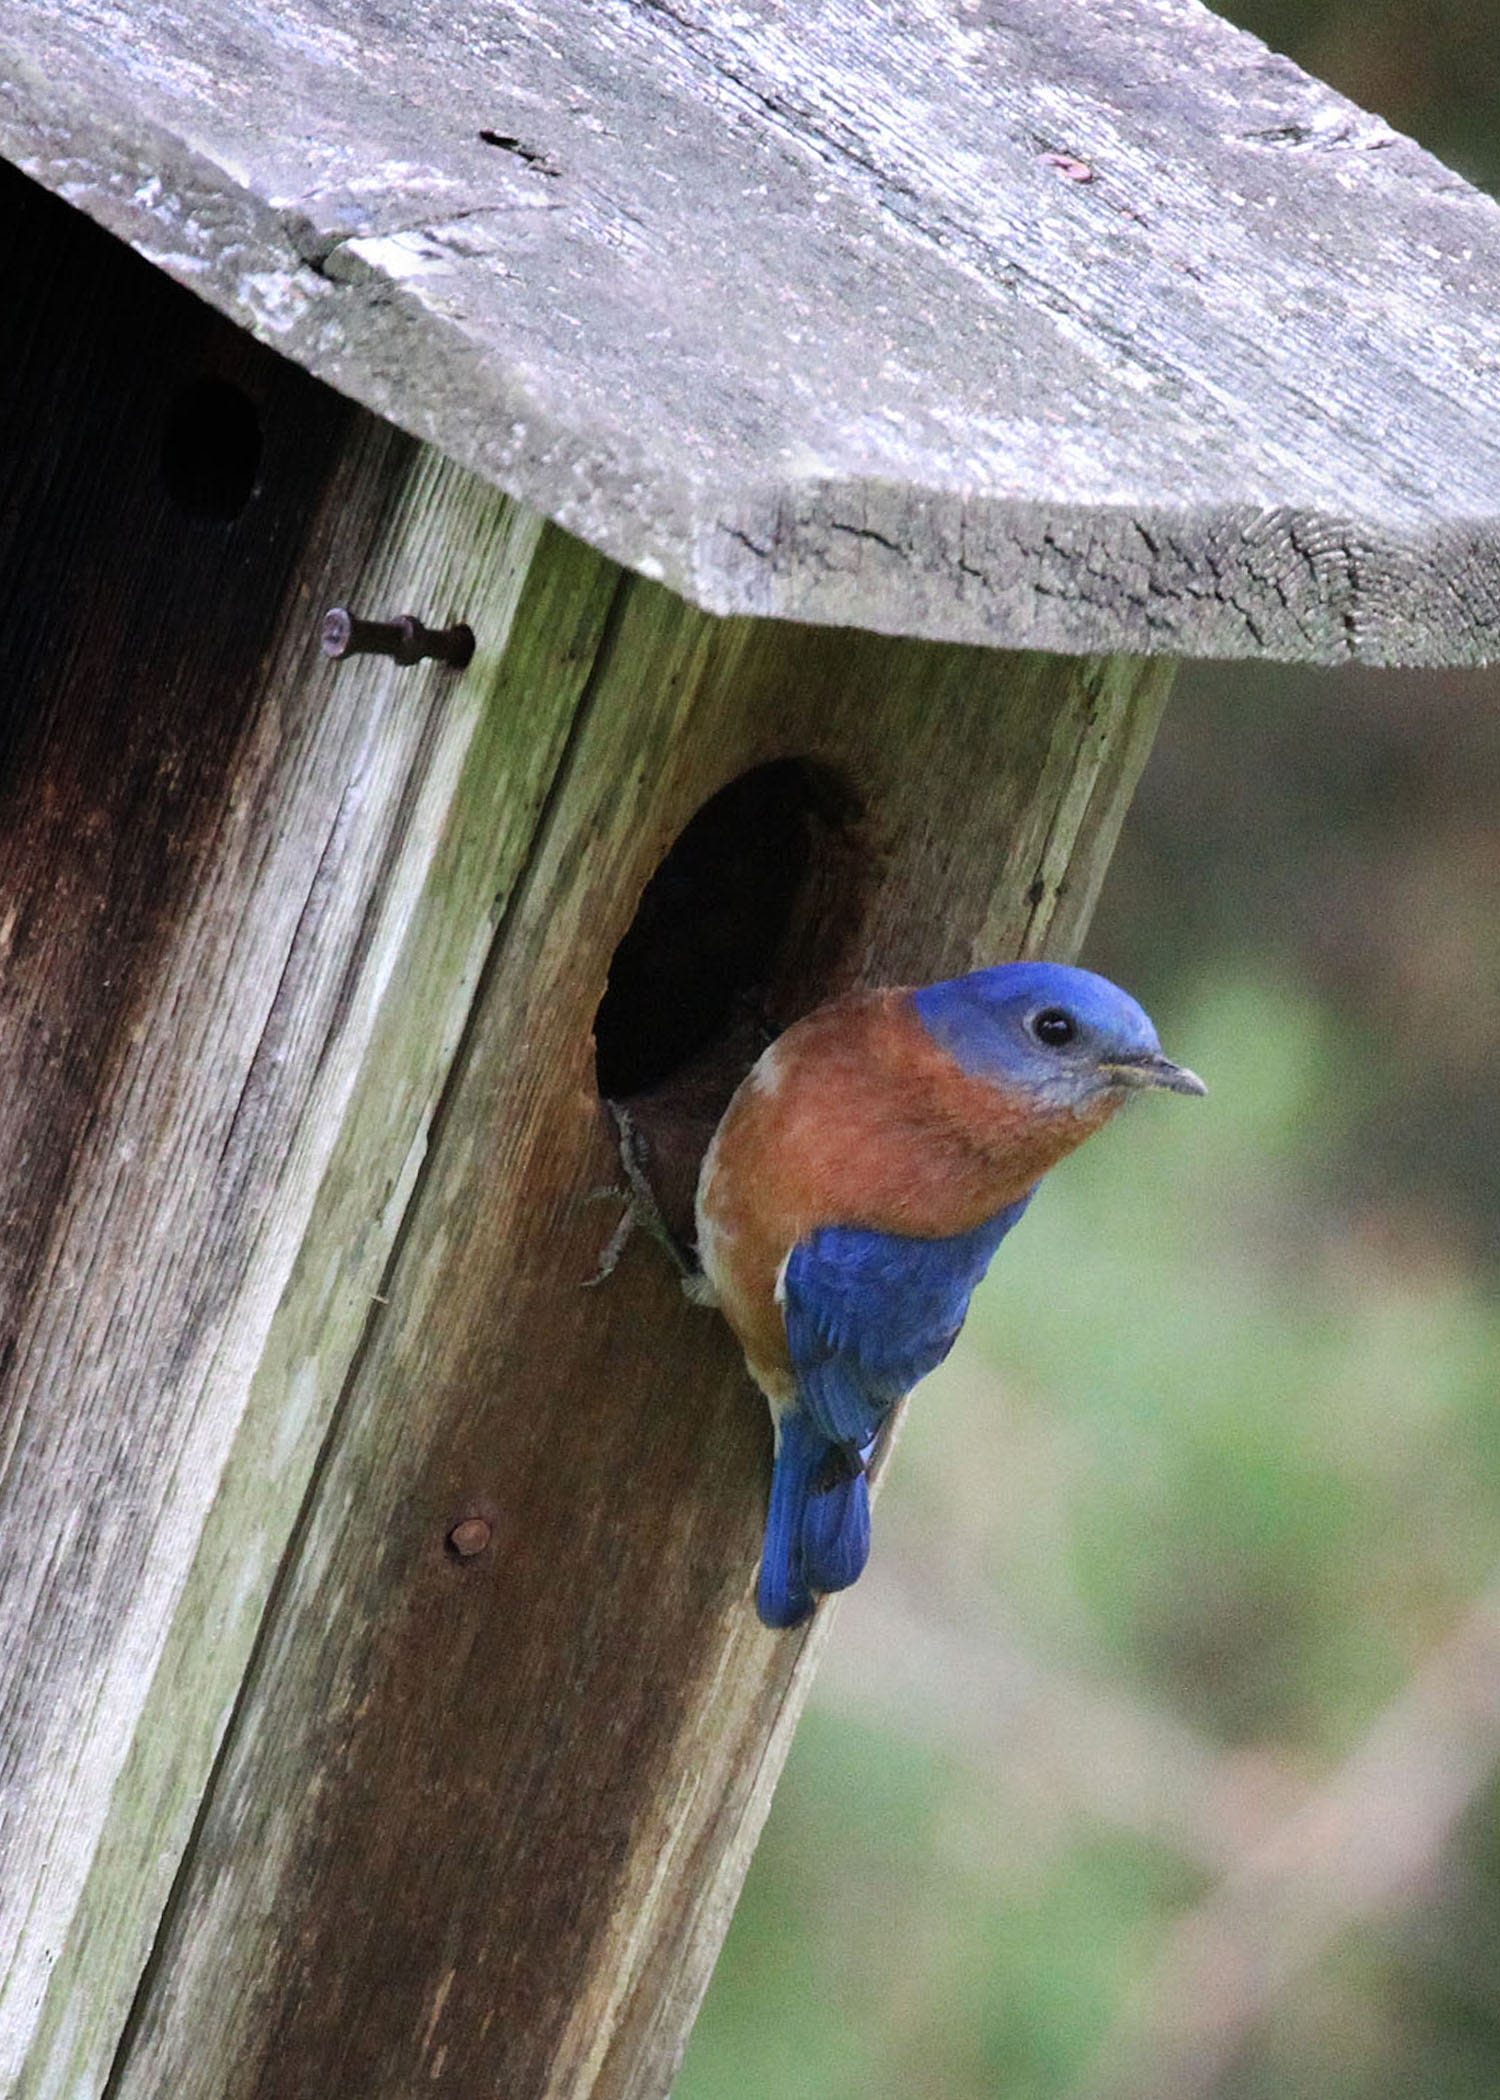 Baby birds are fledging. So should you now clean out the nest boxes?